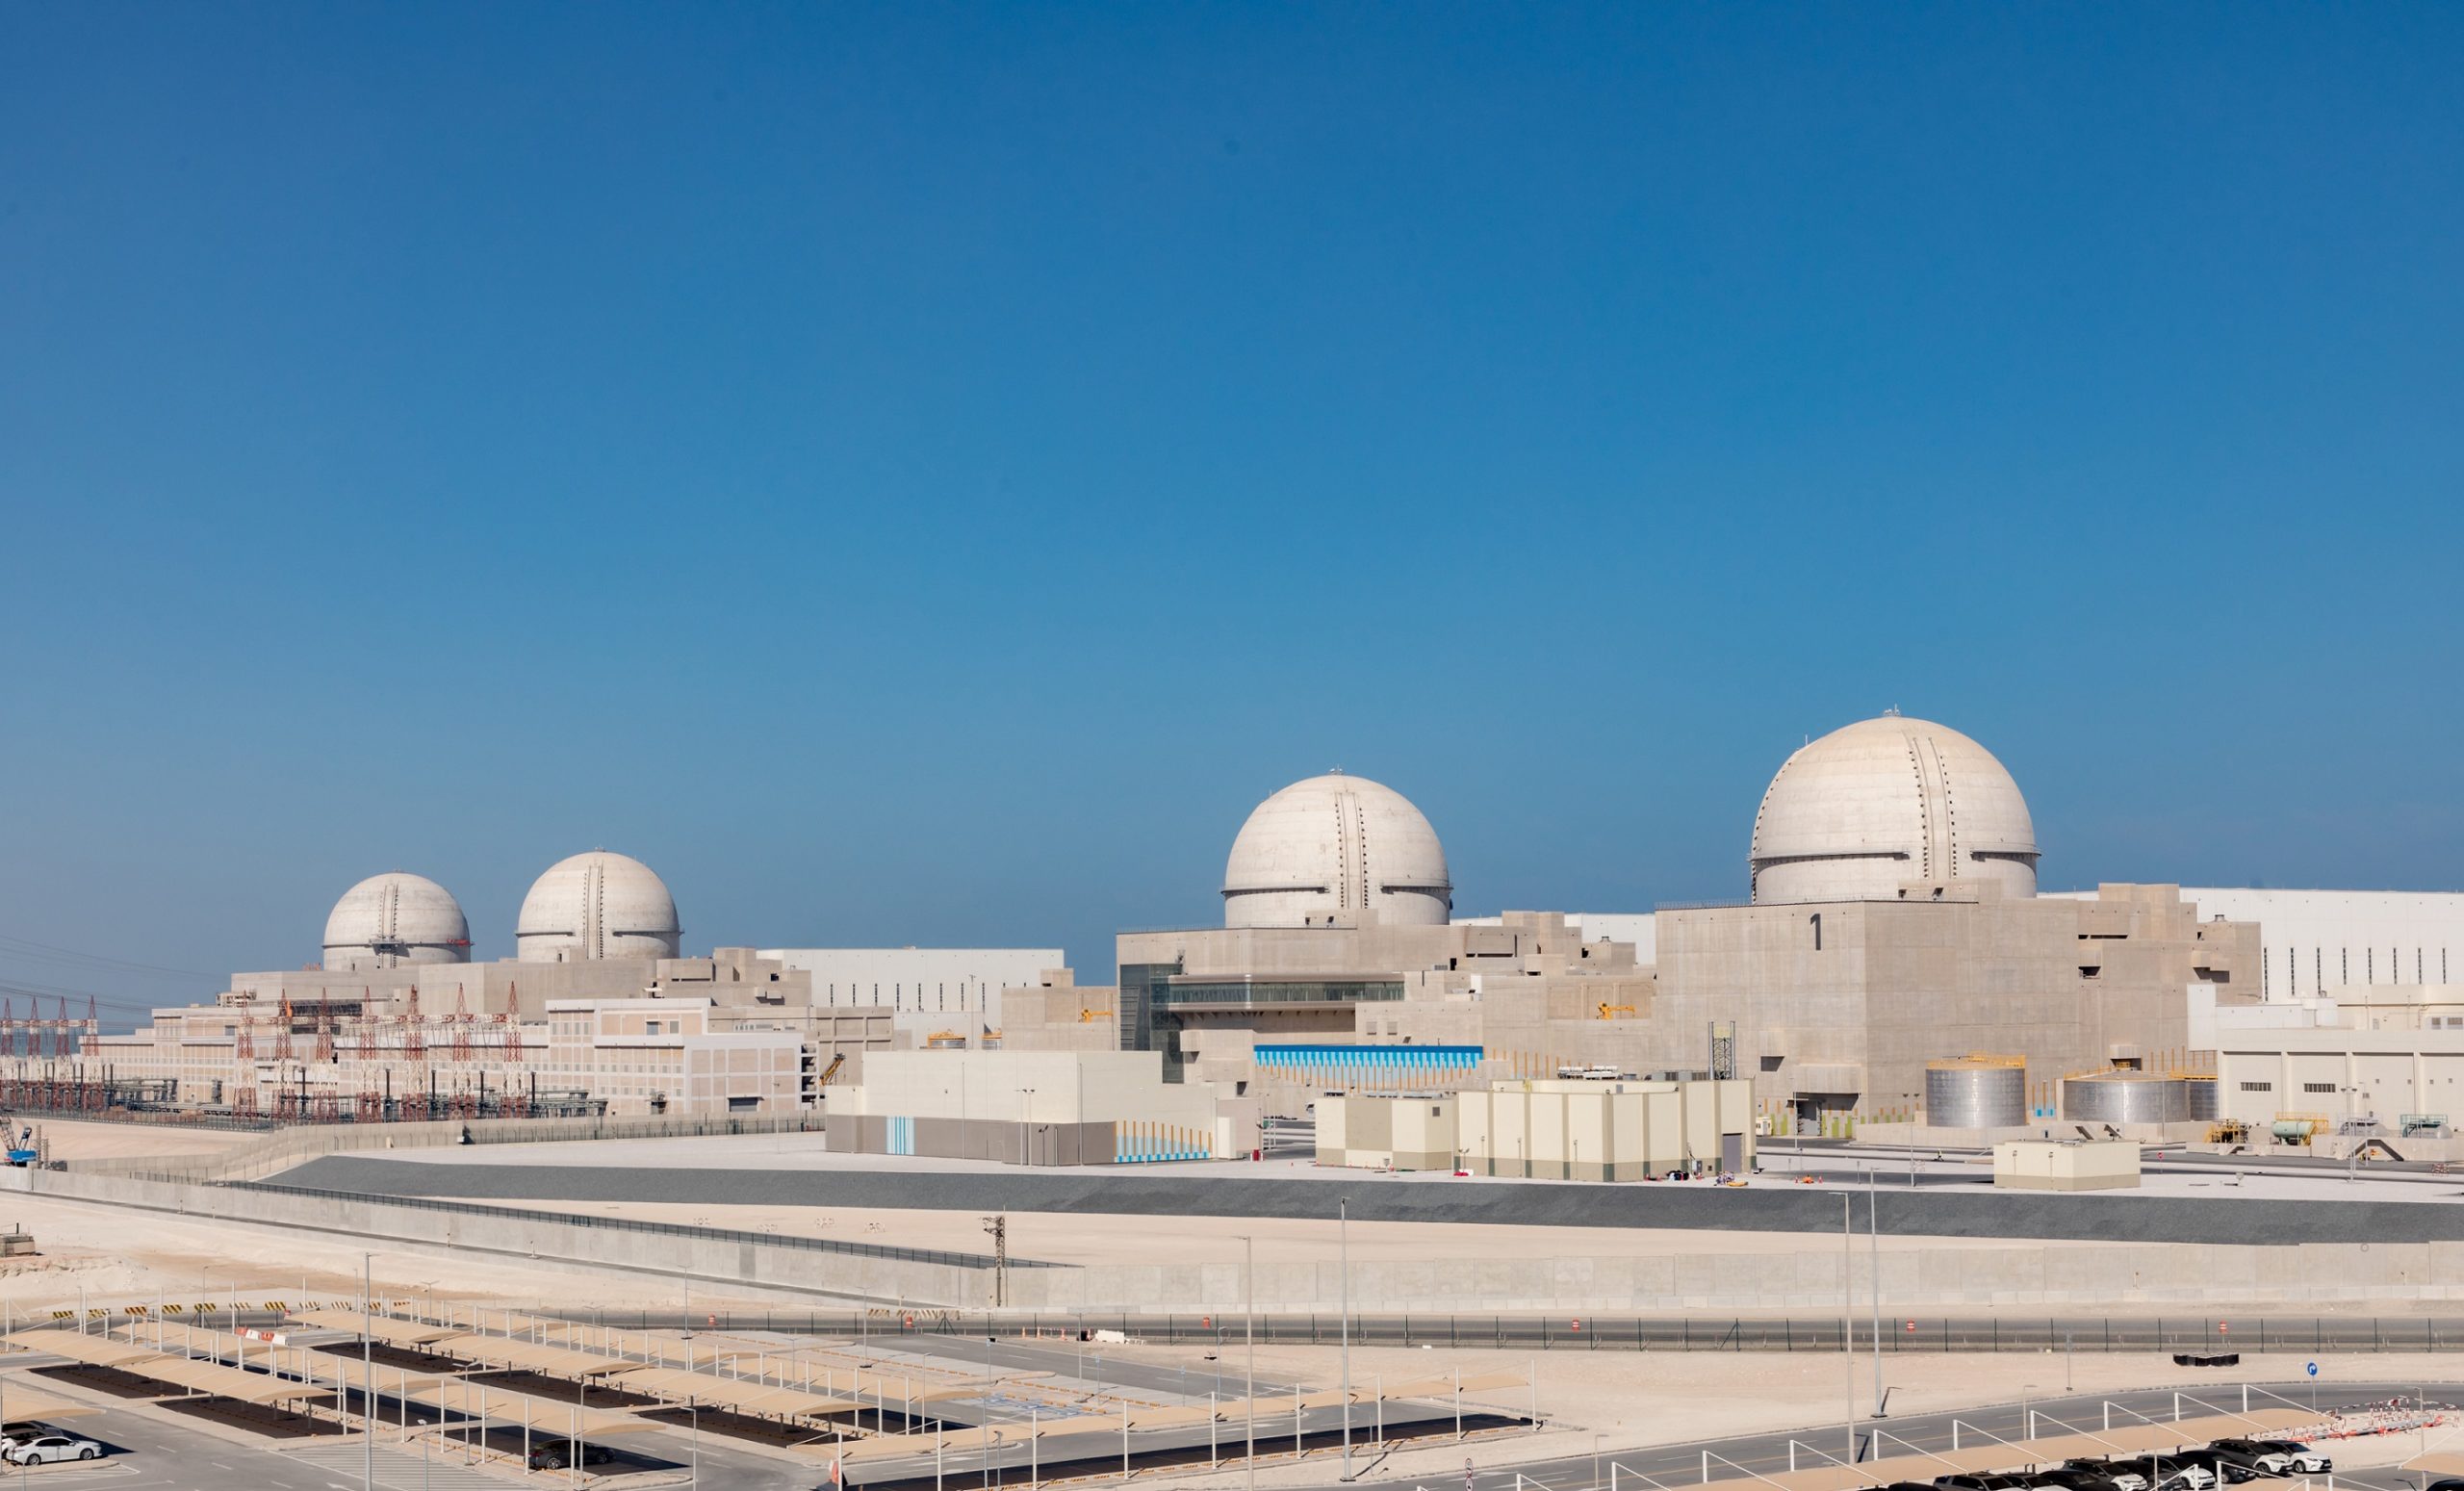 UAE plans new nuclear plant, doubling reactor count